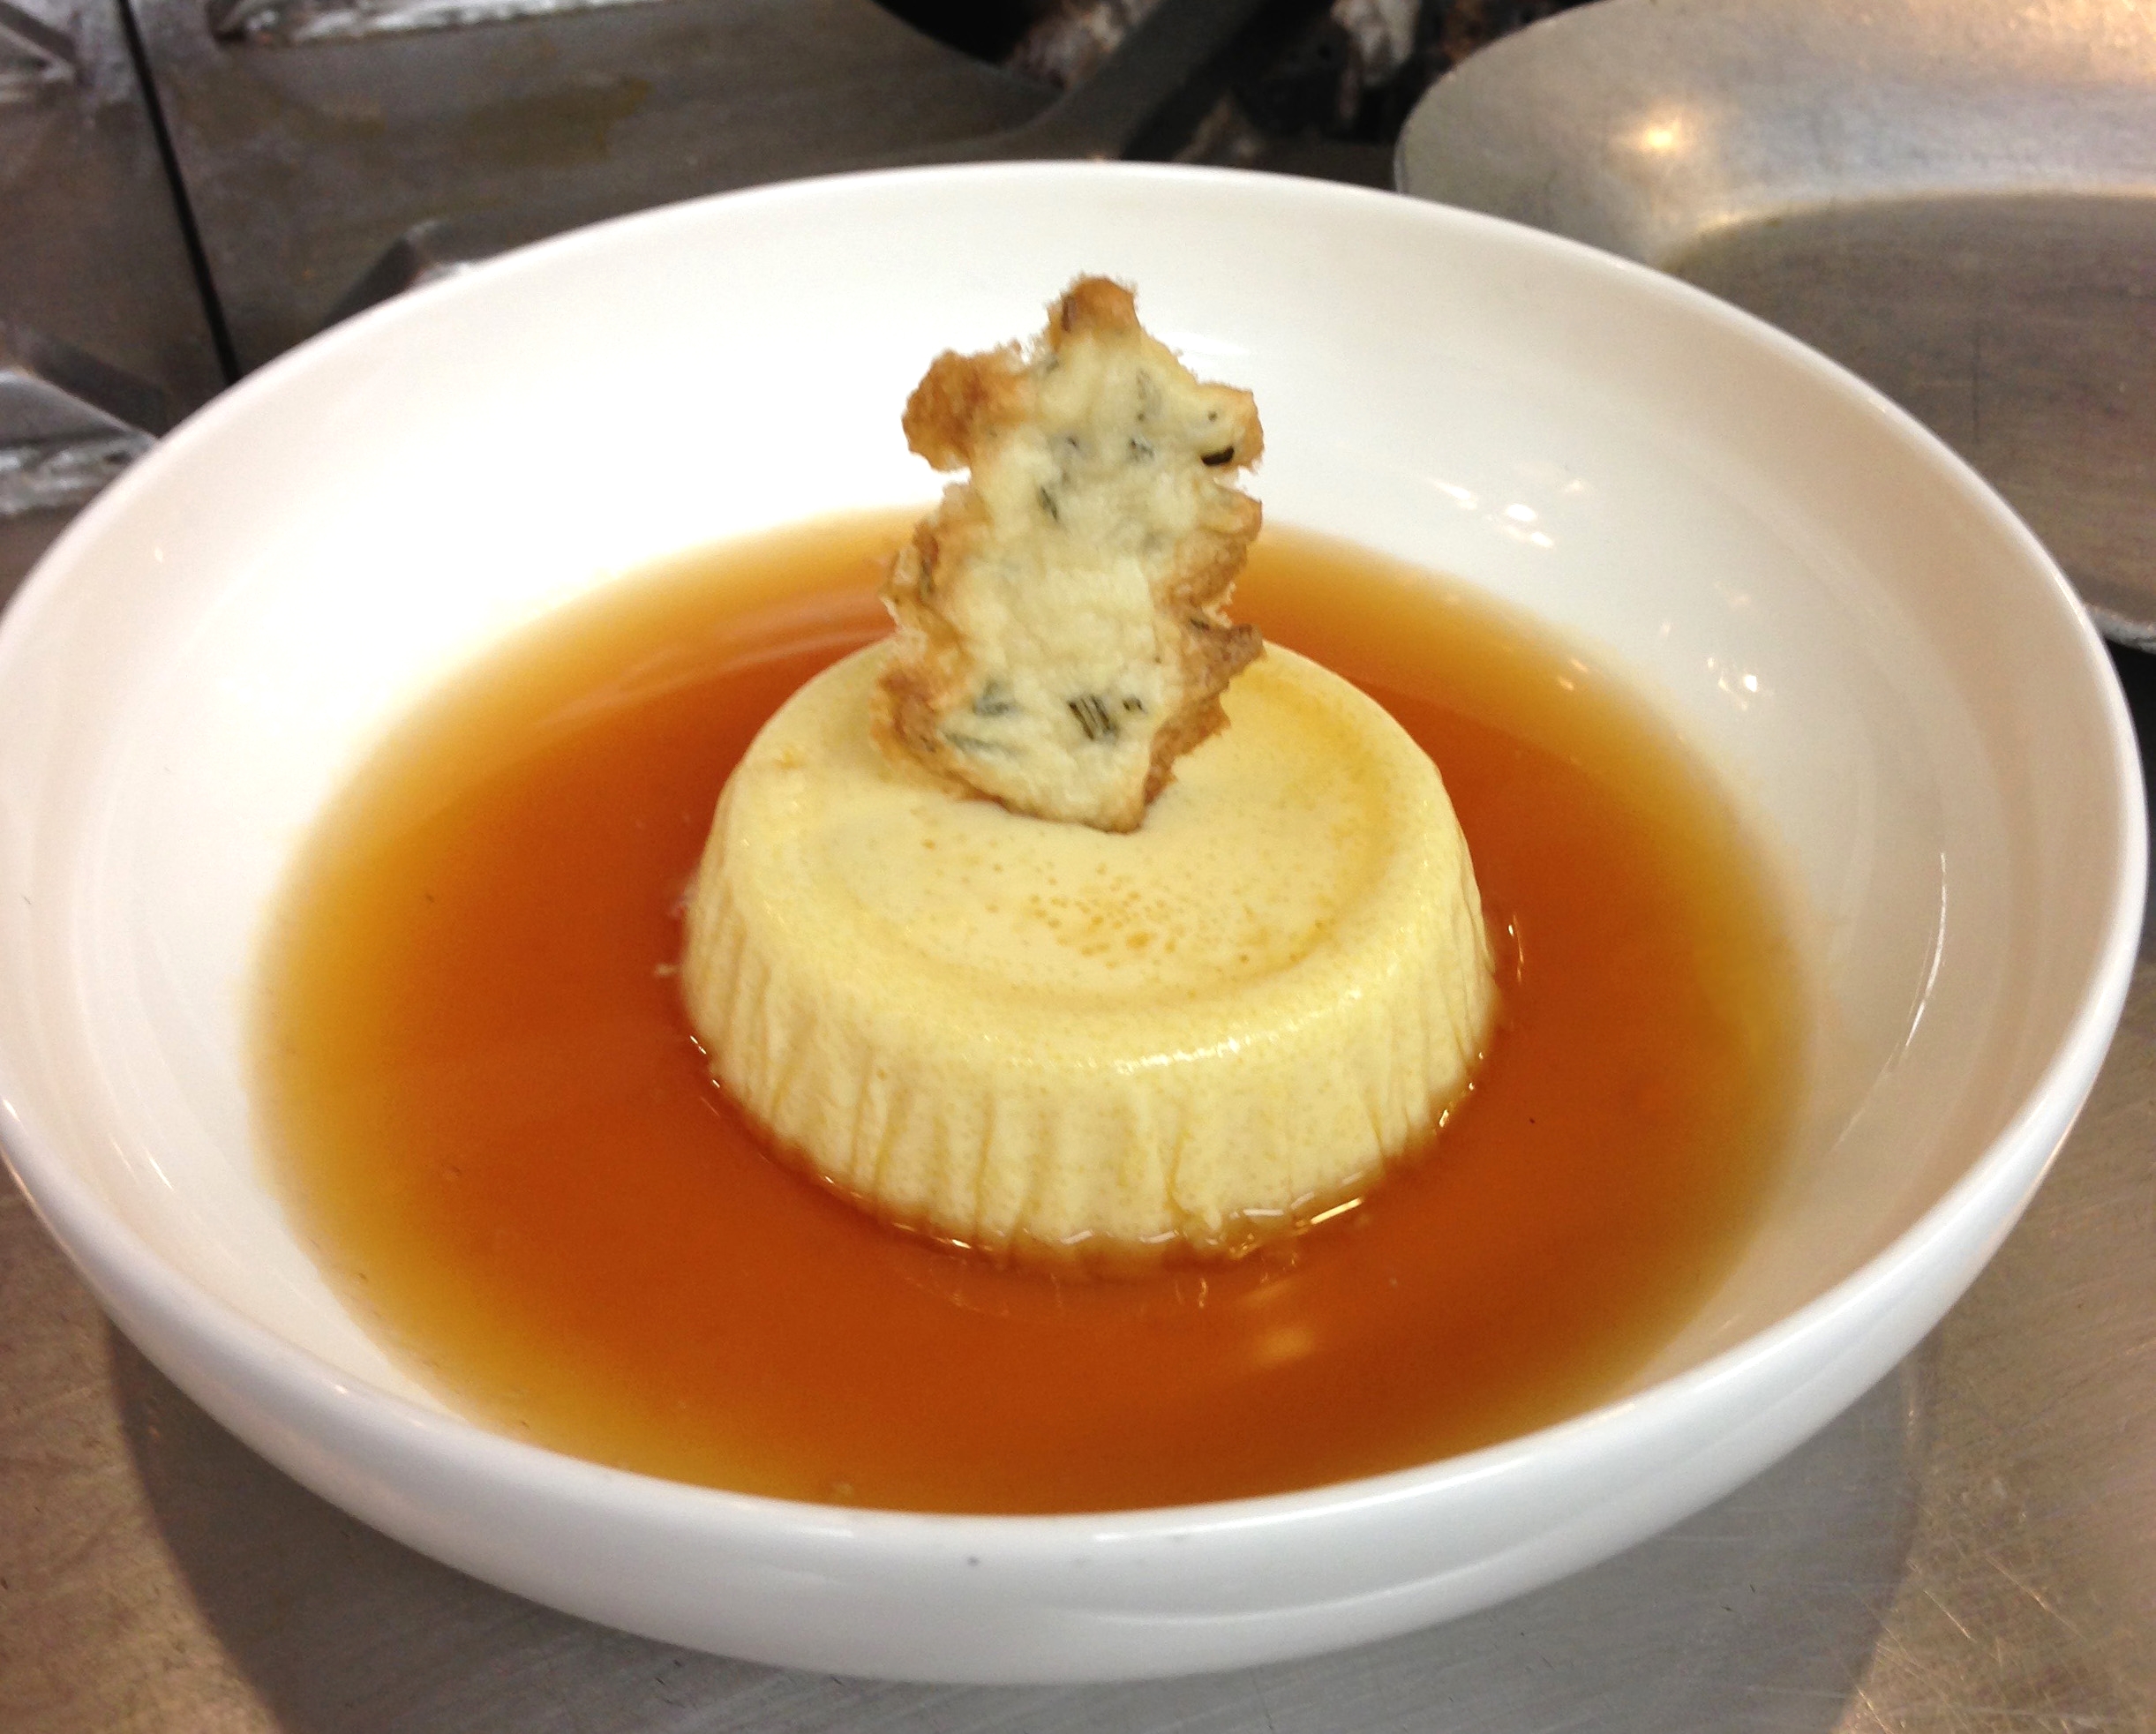 Parmesan and Roasted Garlic Flan in Tomato Consomme